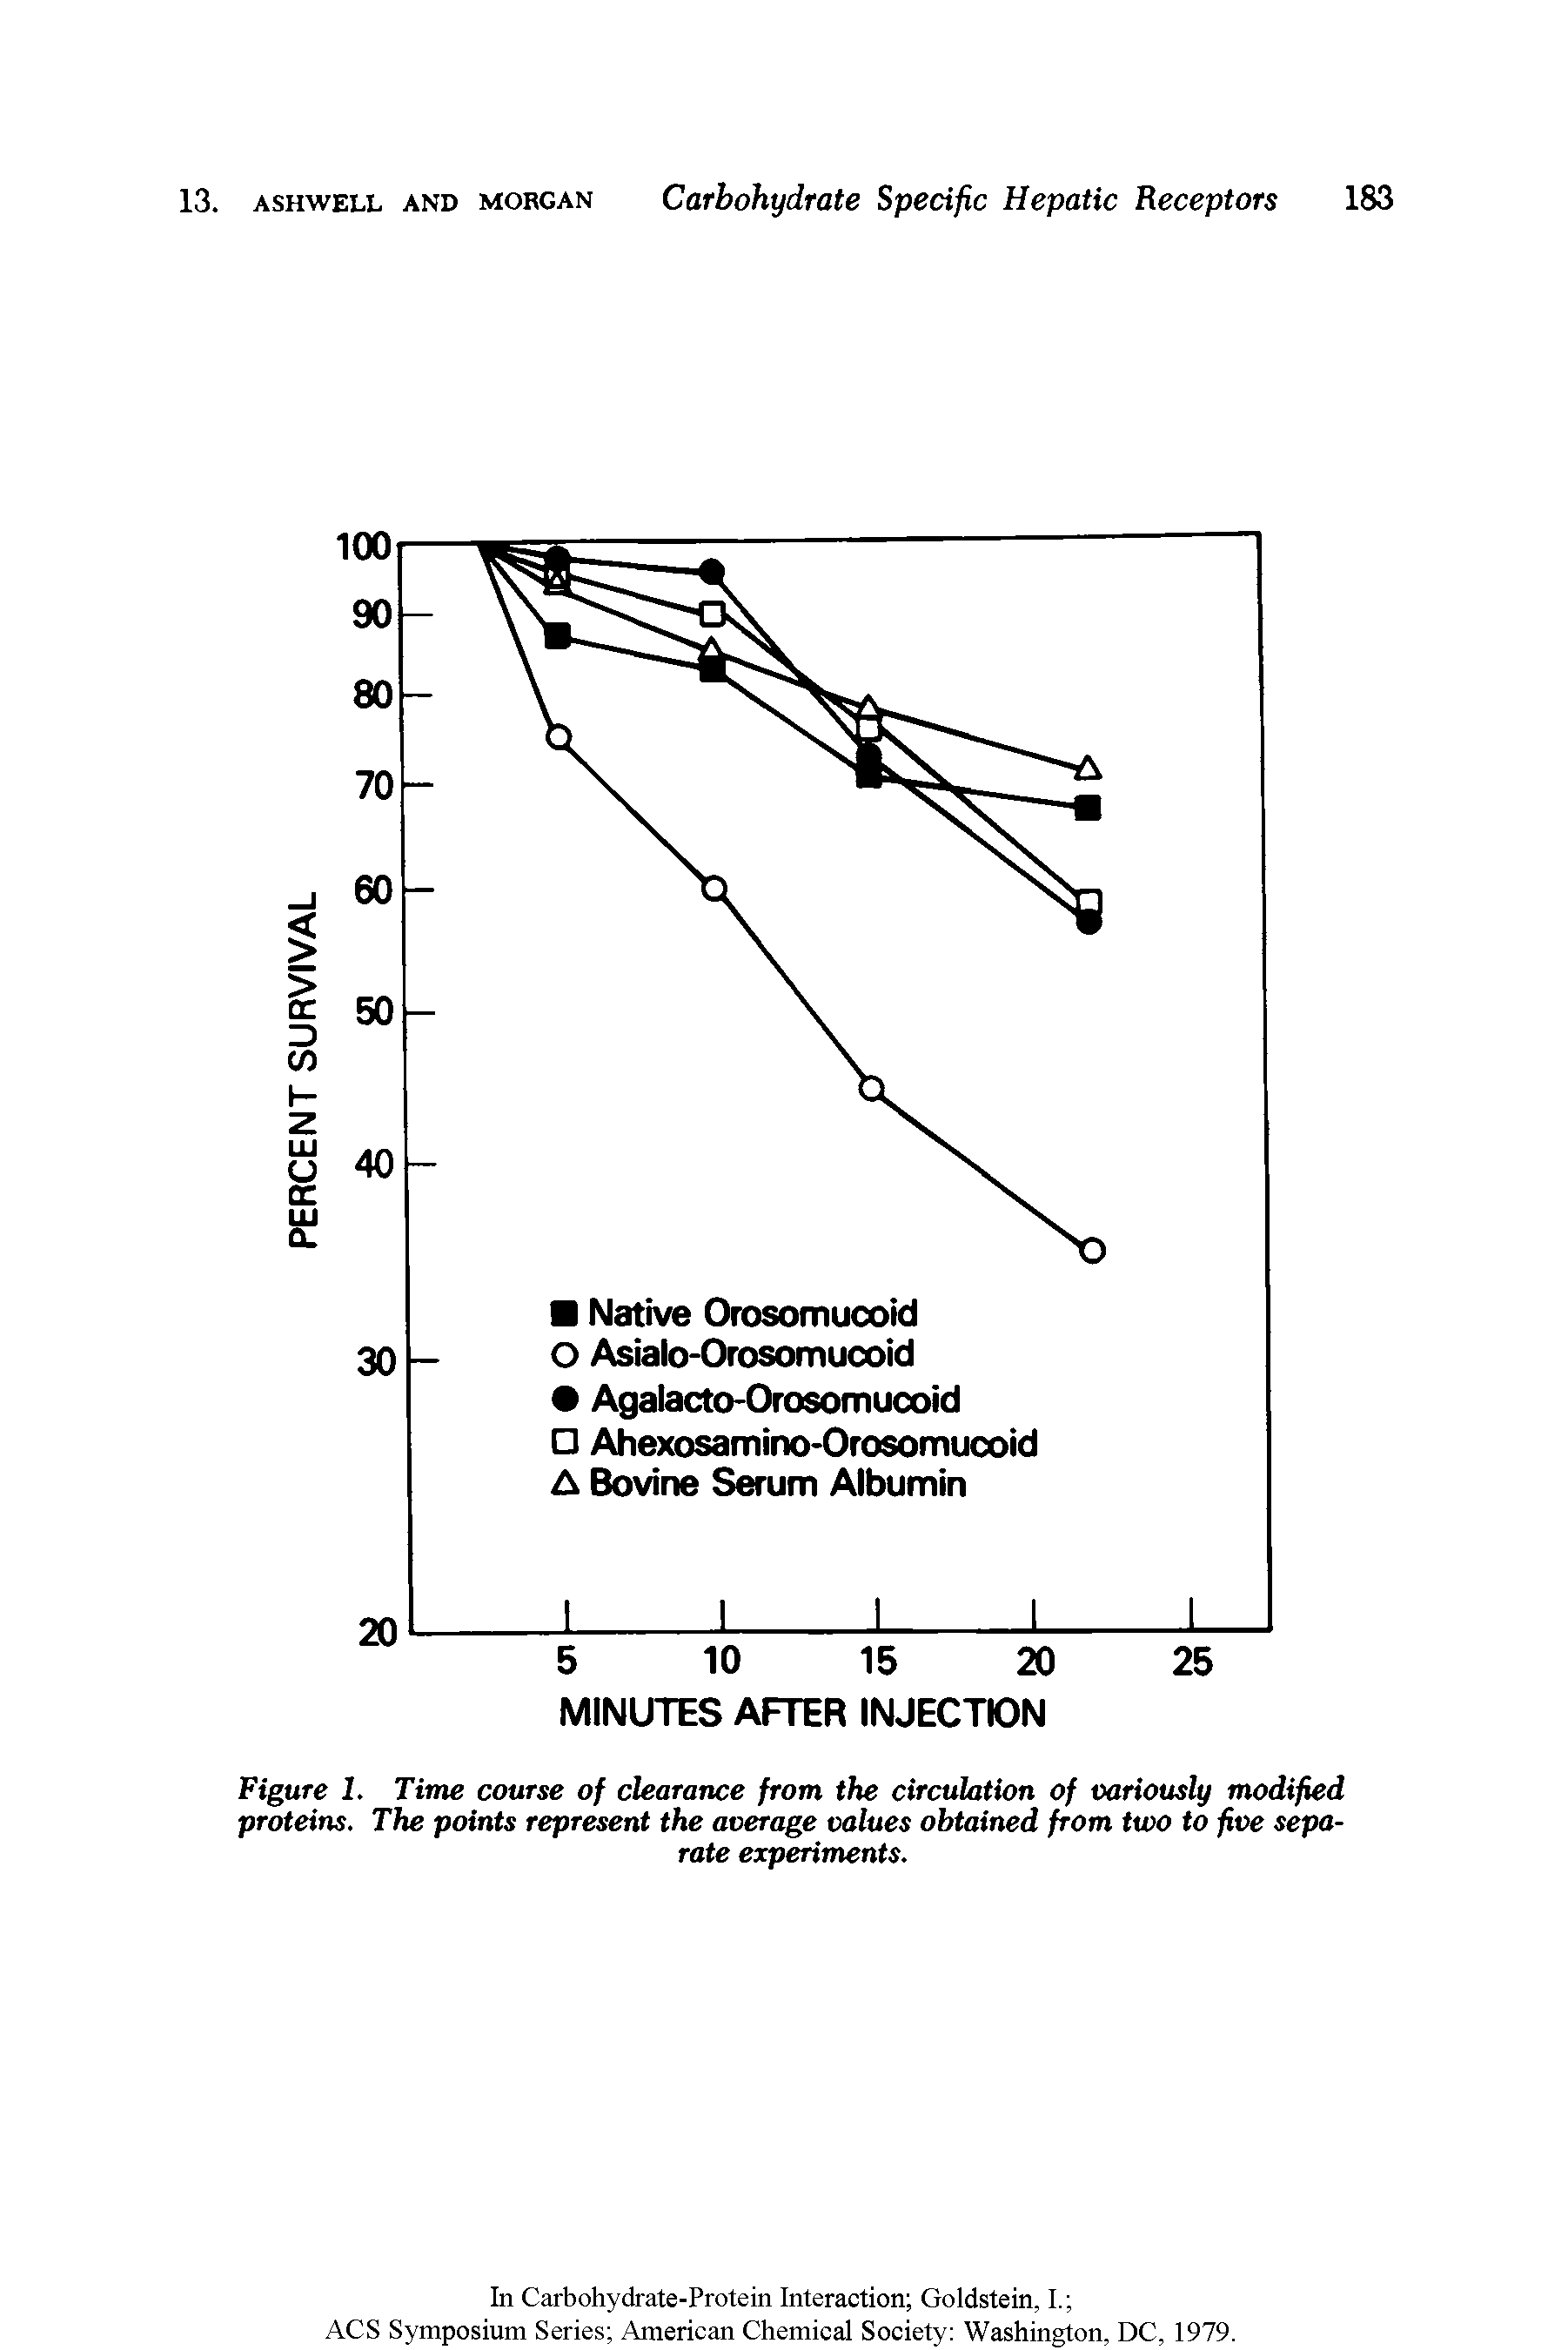 Figure 1. Time course of clearance from the circulation of variously modified proteins. The points represent the average values obtained from two to five separate experiments.